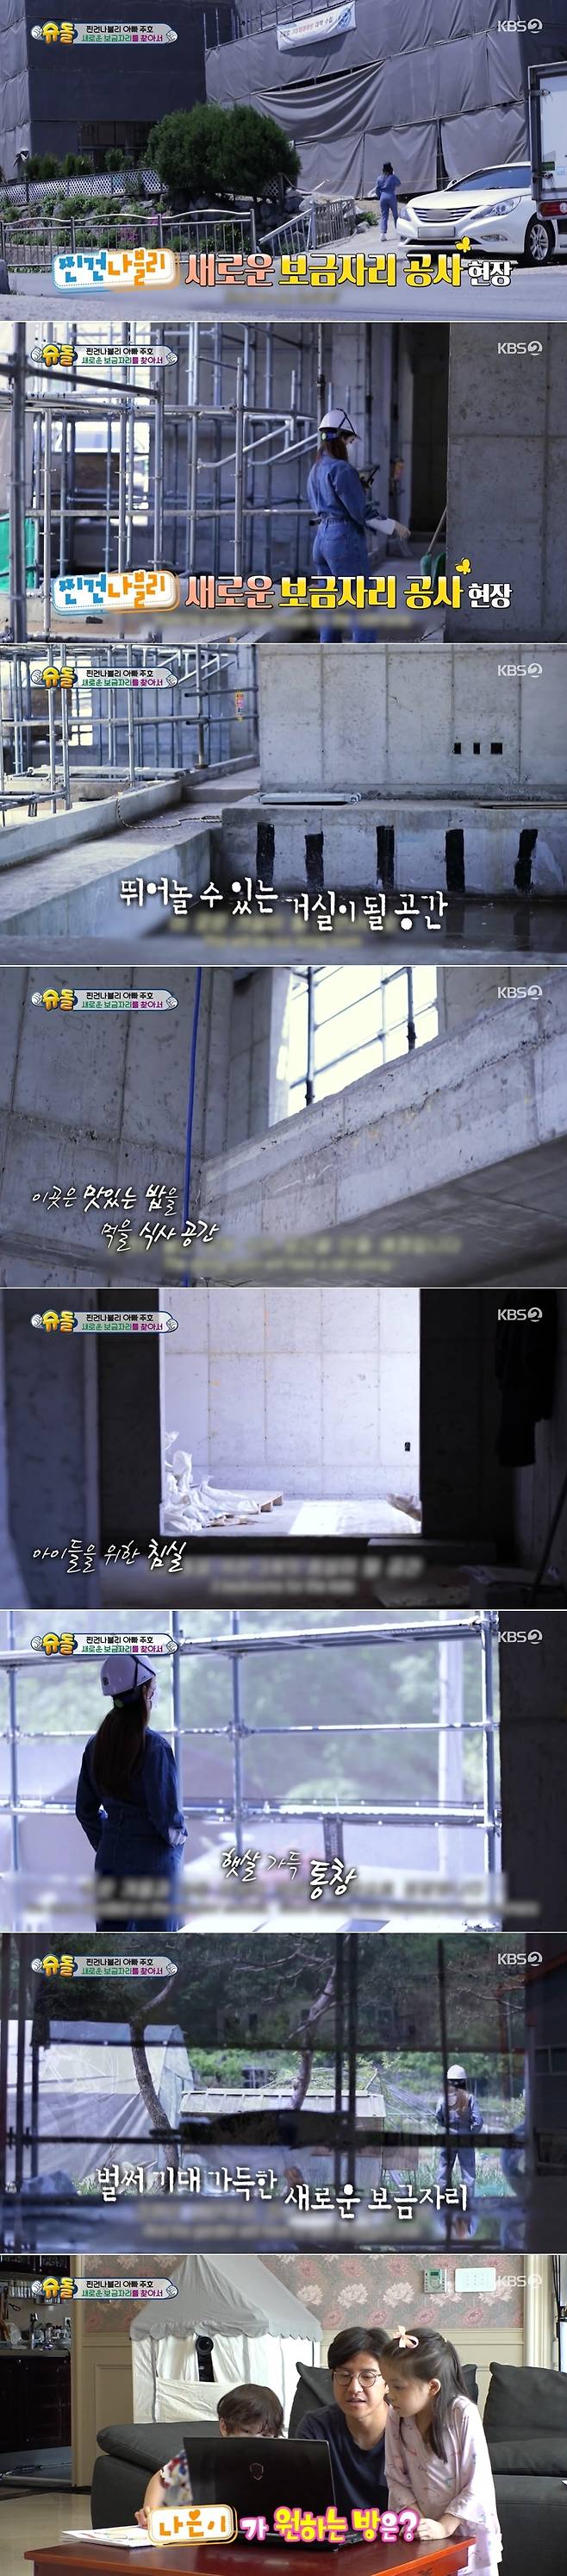 Space to be the new home for footballer Park Joo-ho has been unveiled.On August 8th KBS 2TV The Return of Superman, Park Joo-ho Familys new A Nest of Gentlefolk construction site was introduced.On the day of the broadcast, Park Joo-hos wife Anna found a new A Nest of Gentlefolk under construction.The living room, the kitchen, the bedroom, and the Garden were on the air in turn.Actor So Yoo-jin, who is working as a narrator, said, There is no place where I did not care about every corner.I am planning to go to Garden, said Park Solmi, another narrator. I am really looking forward to a new house.Park Joo-ho asked her daughter Na-eun, What room do you want Na-eun to have when shes building our house?Na-eun replied ballet, while his son Ghanhu said football.Na-eun said, I hope it is a place where I have a soccer field. Park Joo-ho laughed, The soccer field? Then my dad should work harder.Meanwhile, the 393th episode of The Return of Superman broadcast on the day was decorated with the subtitle Little but Big Hero.Park Joo-ho children, Chin Gunnabli, have gone on a sultry summer health care with a passionate home training.Among them, the youngest Jinwoos movement was reminiscent of the past, and focused attention.